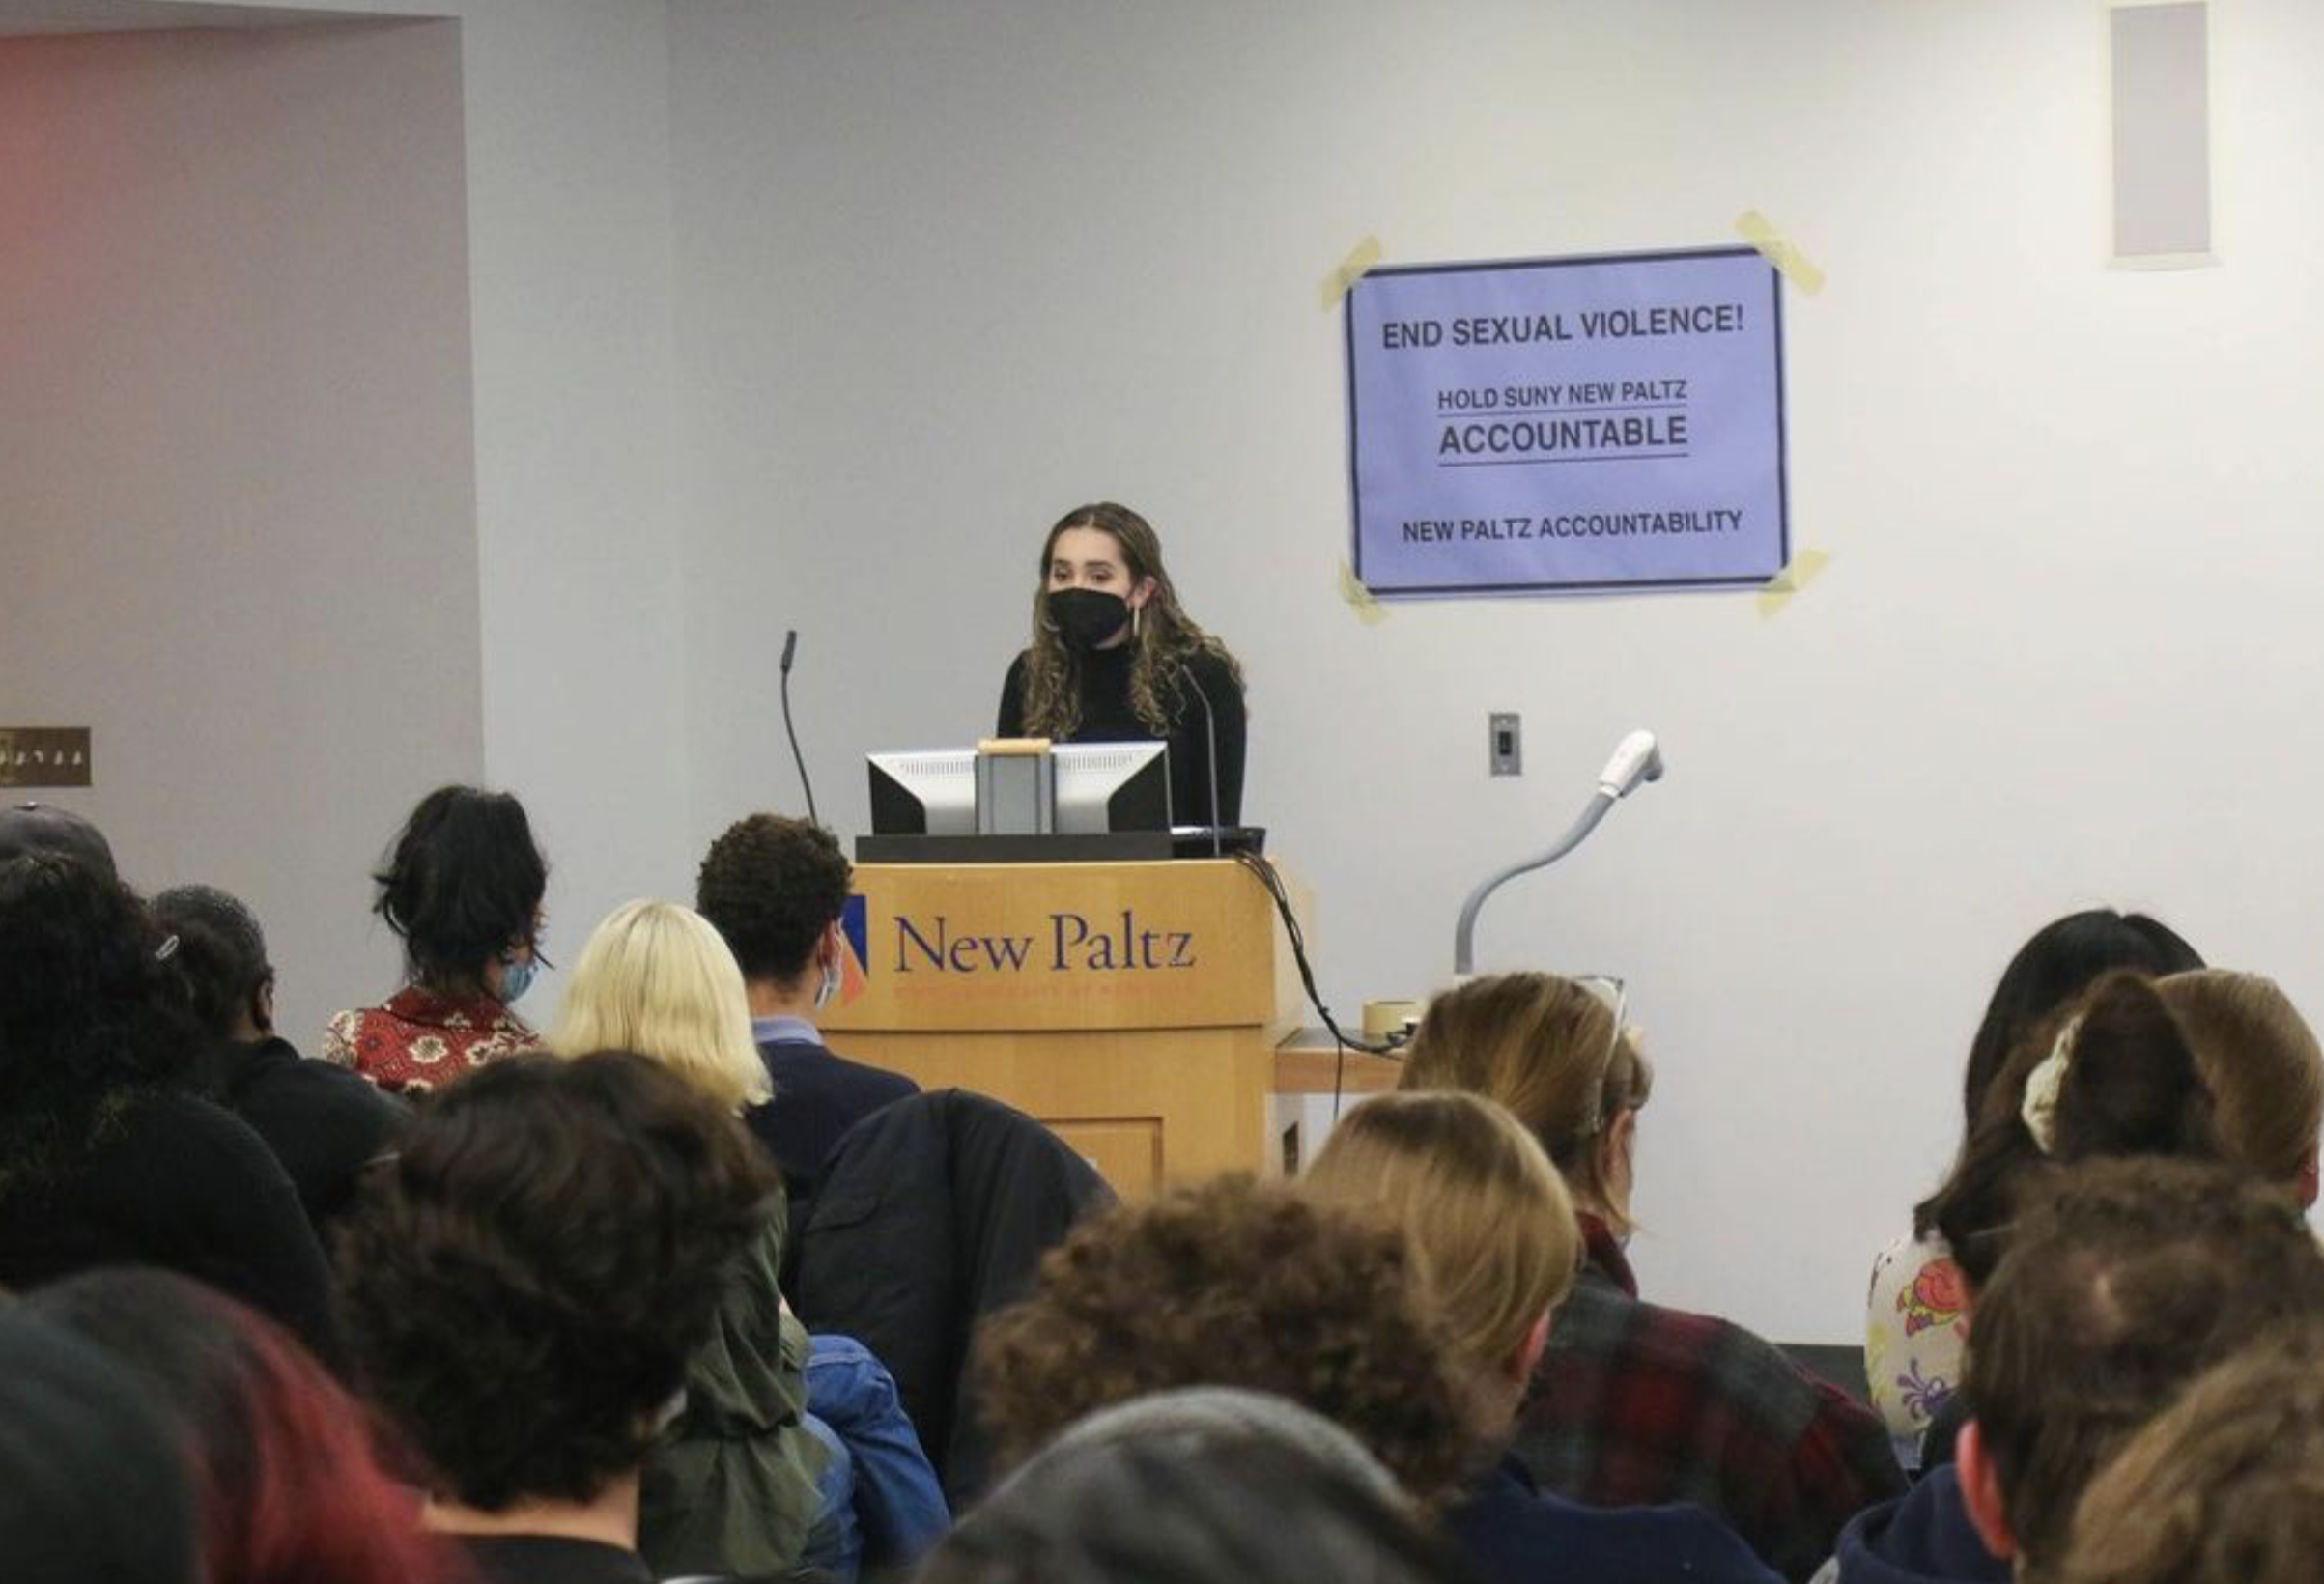 Students and Faculty Speak Out Against Sexual Violence at First New Paltz Accountability Forum